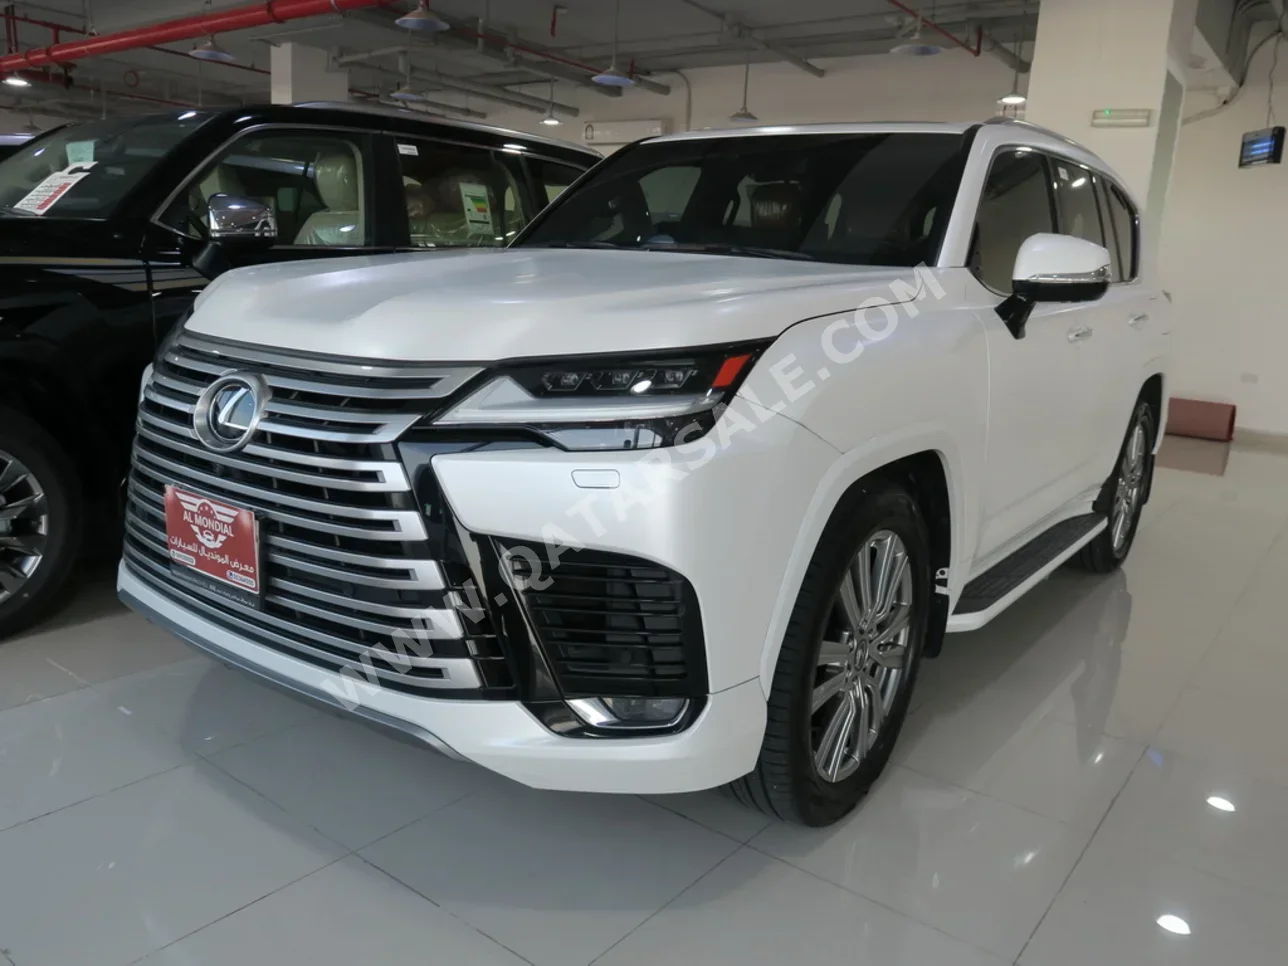 Lexus  LX  600 VIP  2022  Automatic  58,000 Km  6 Cylinder  Four Wheel Drive (4WD)  SUV  White  With Warranty